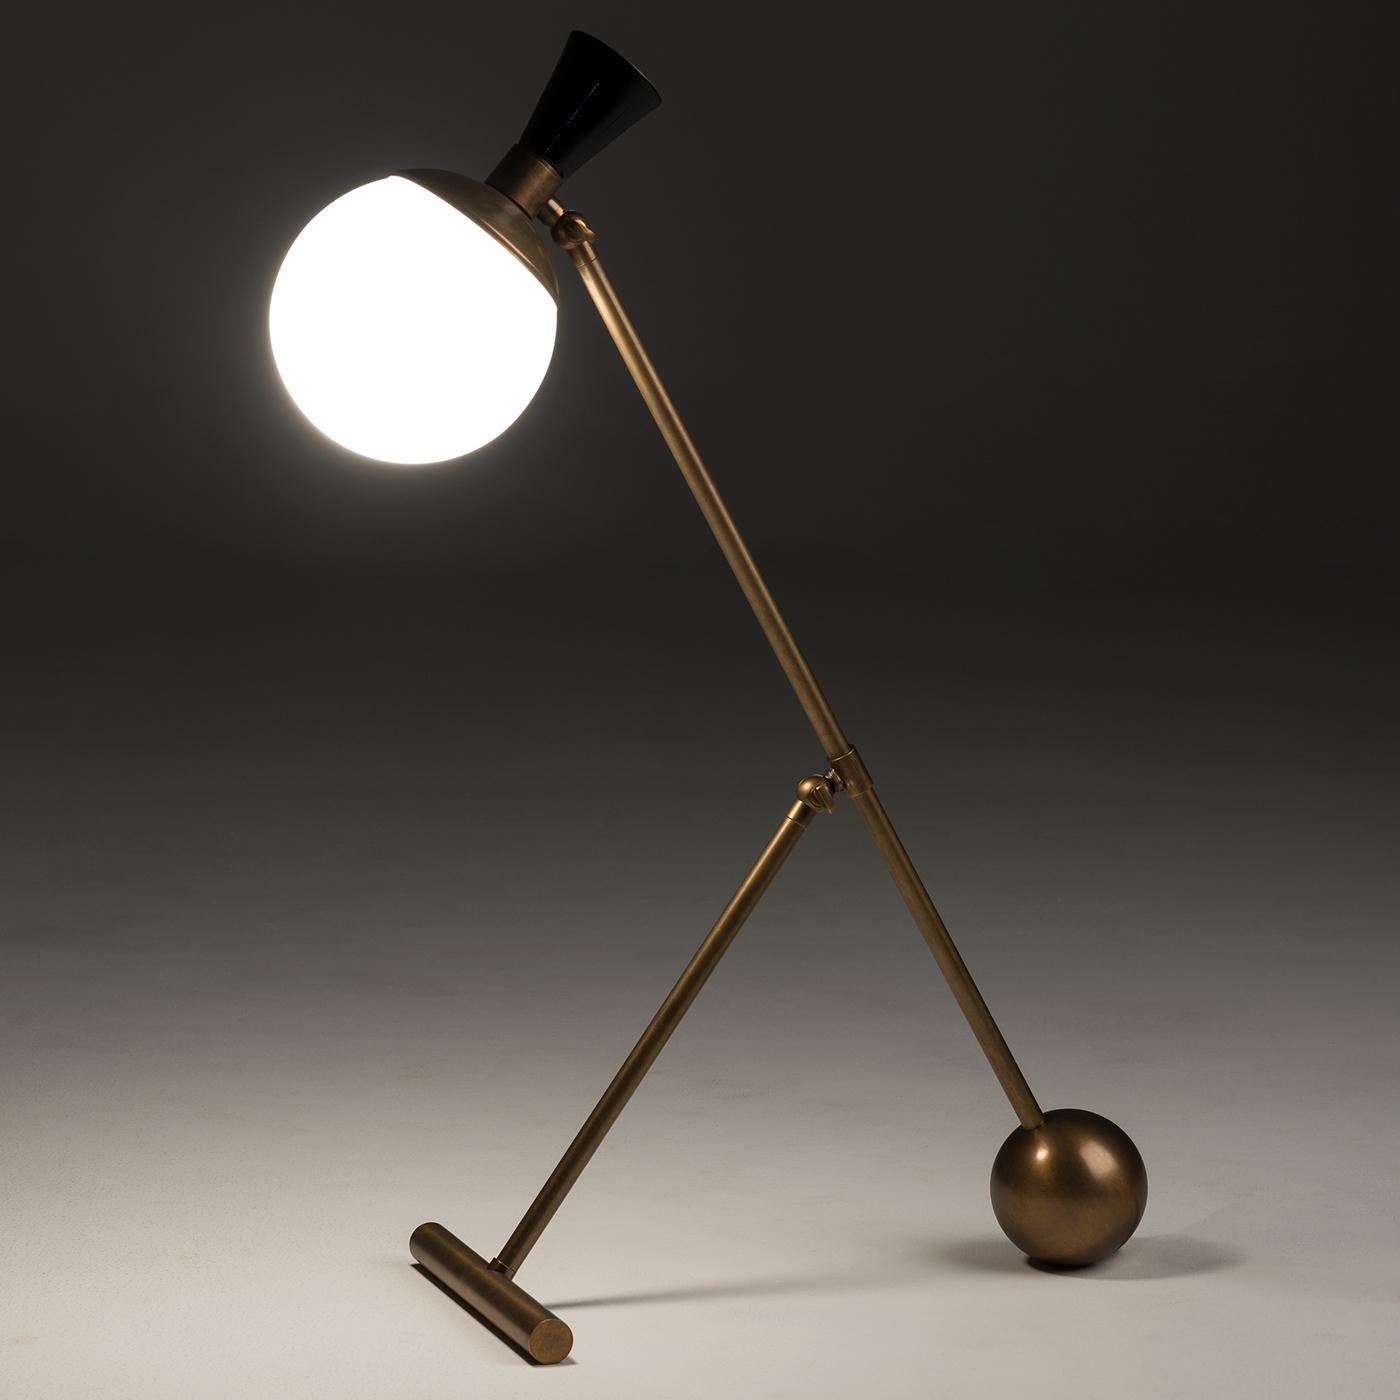 The Igloo Table Lamp is defined by playful use of line and form. A simple yet striking spherical diffuser contrasts with a robust bronze structure, boasting a hand-etched finish for a subtle vintage allure. Emitting a warm, even glow, this modern